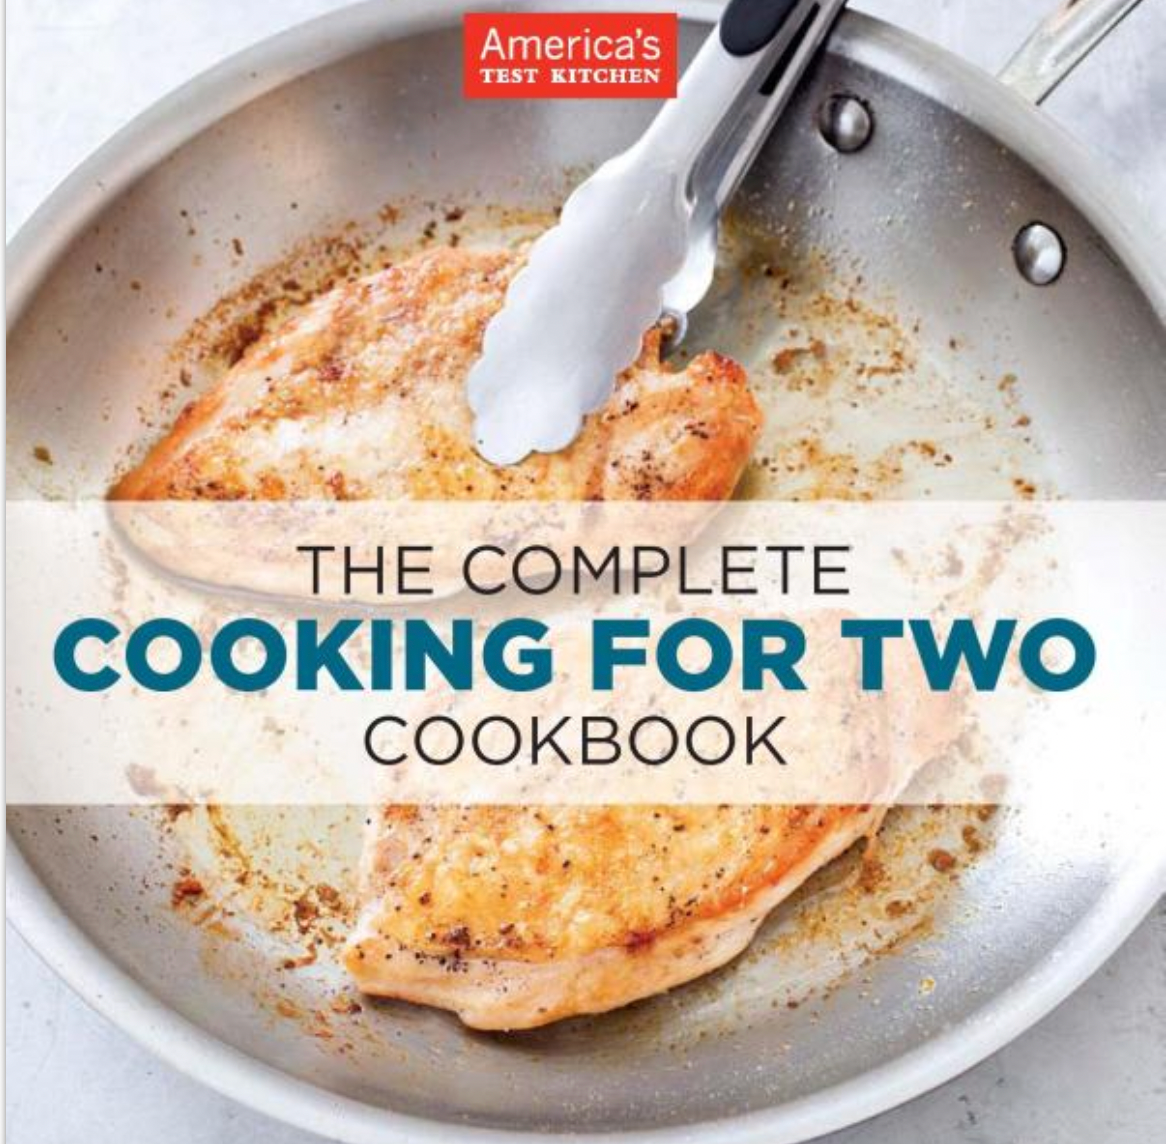 America's Test Kitchen The Complete Cooking for Two Cookbook